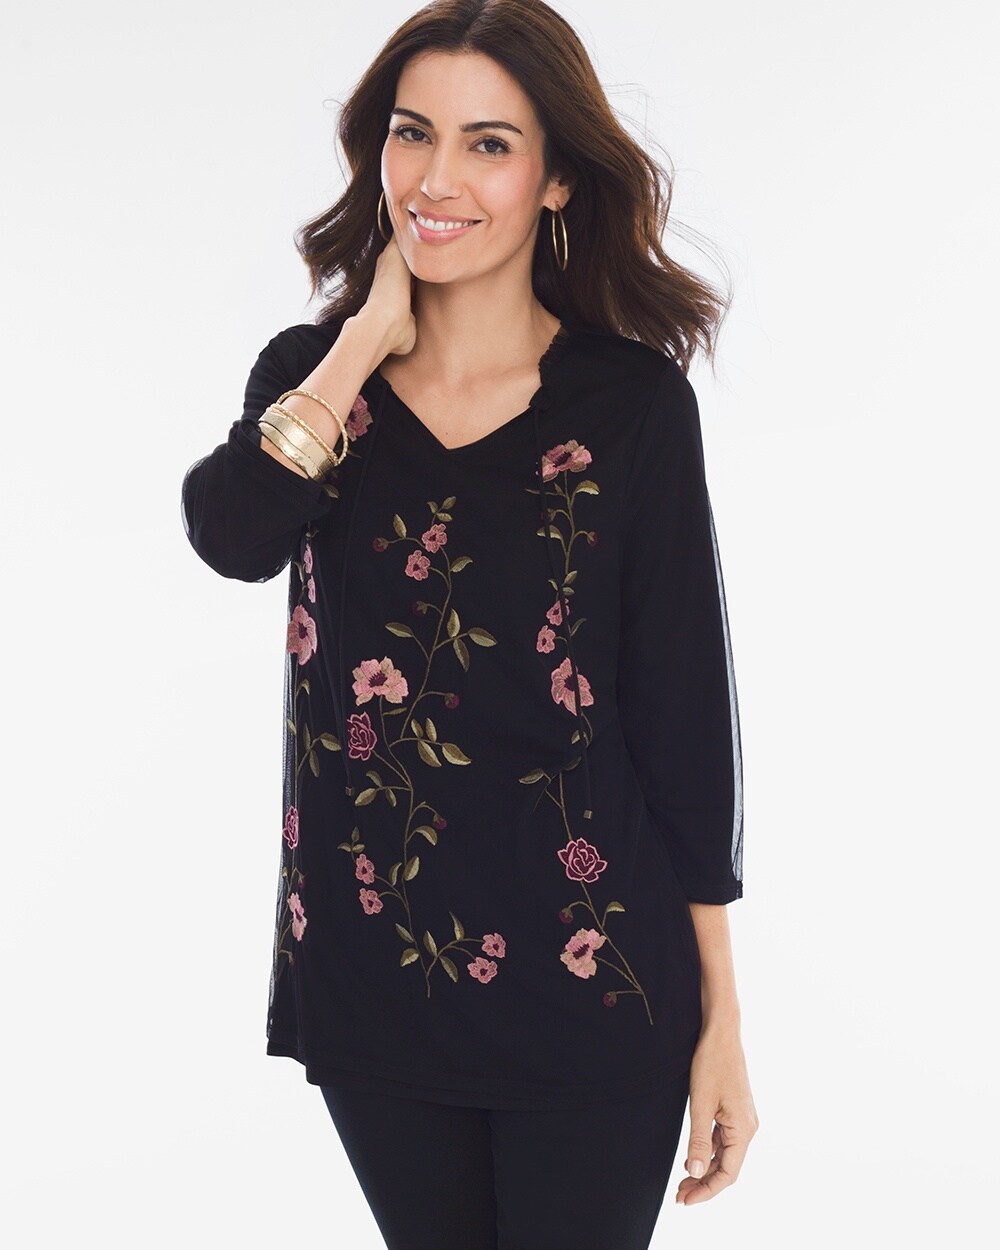 Embroidered Flowers Mesh Top